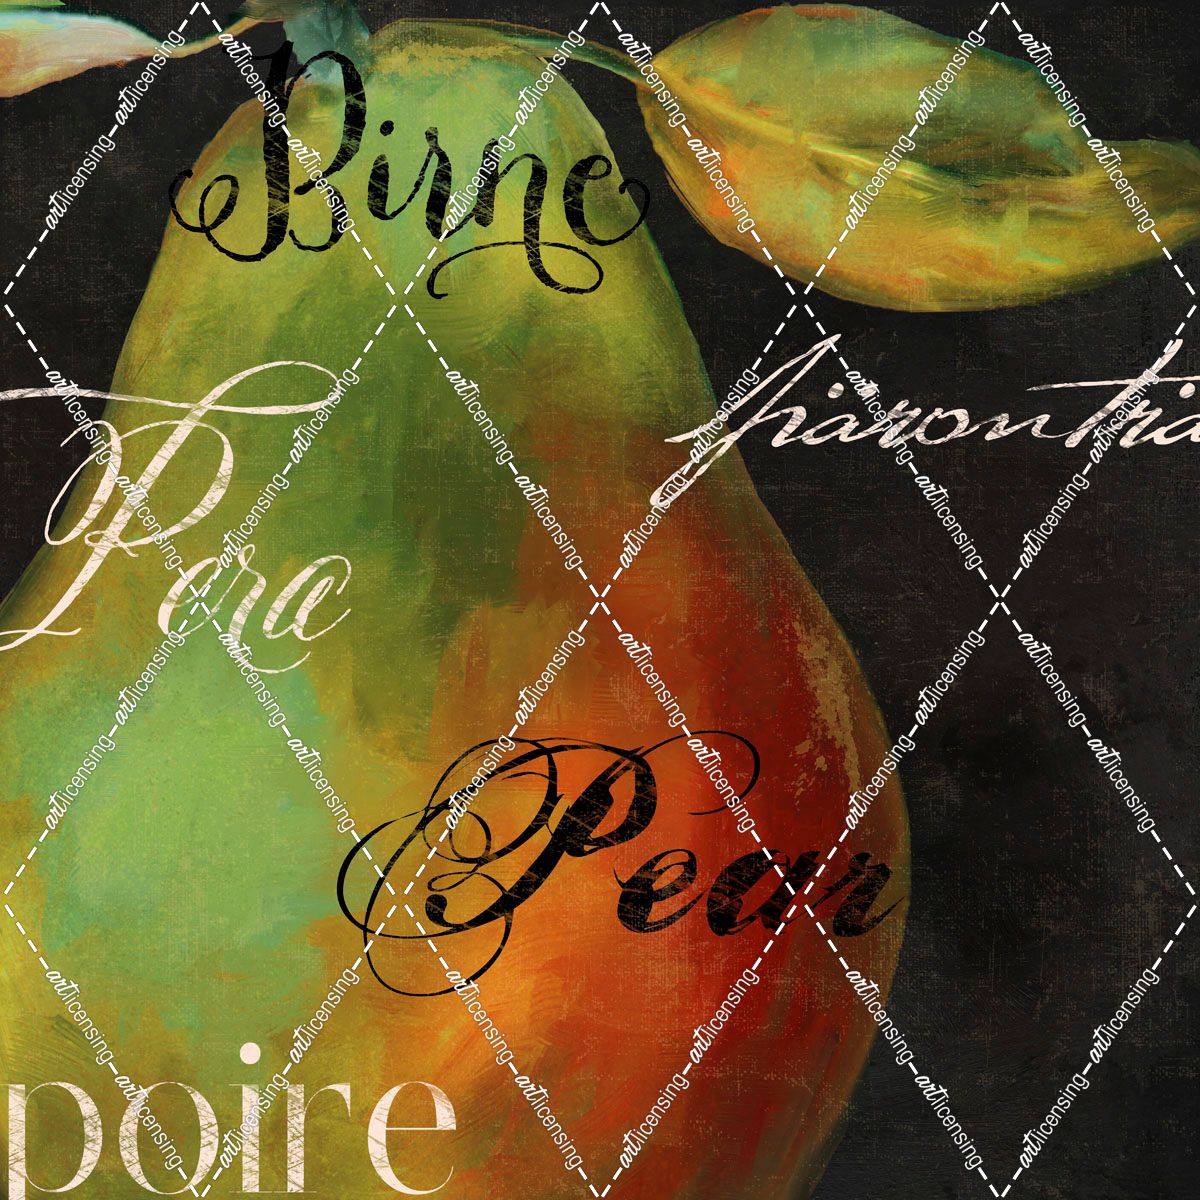 Painted Pear I